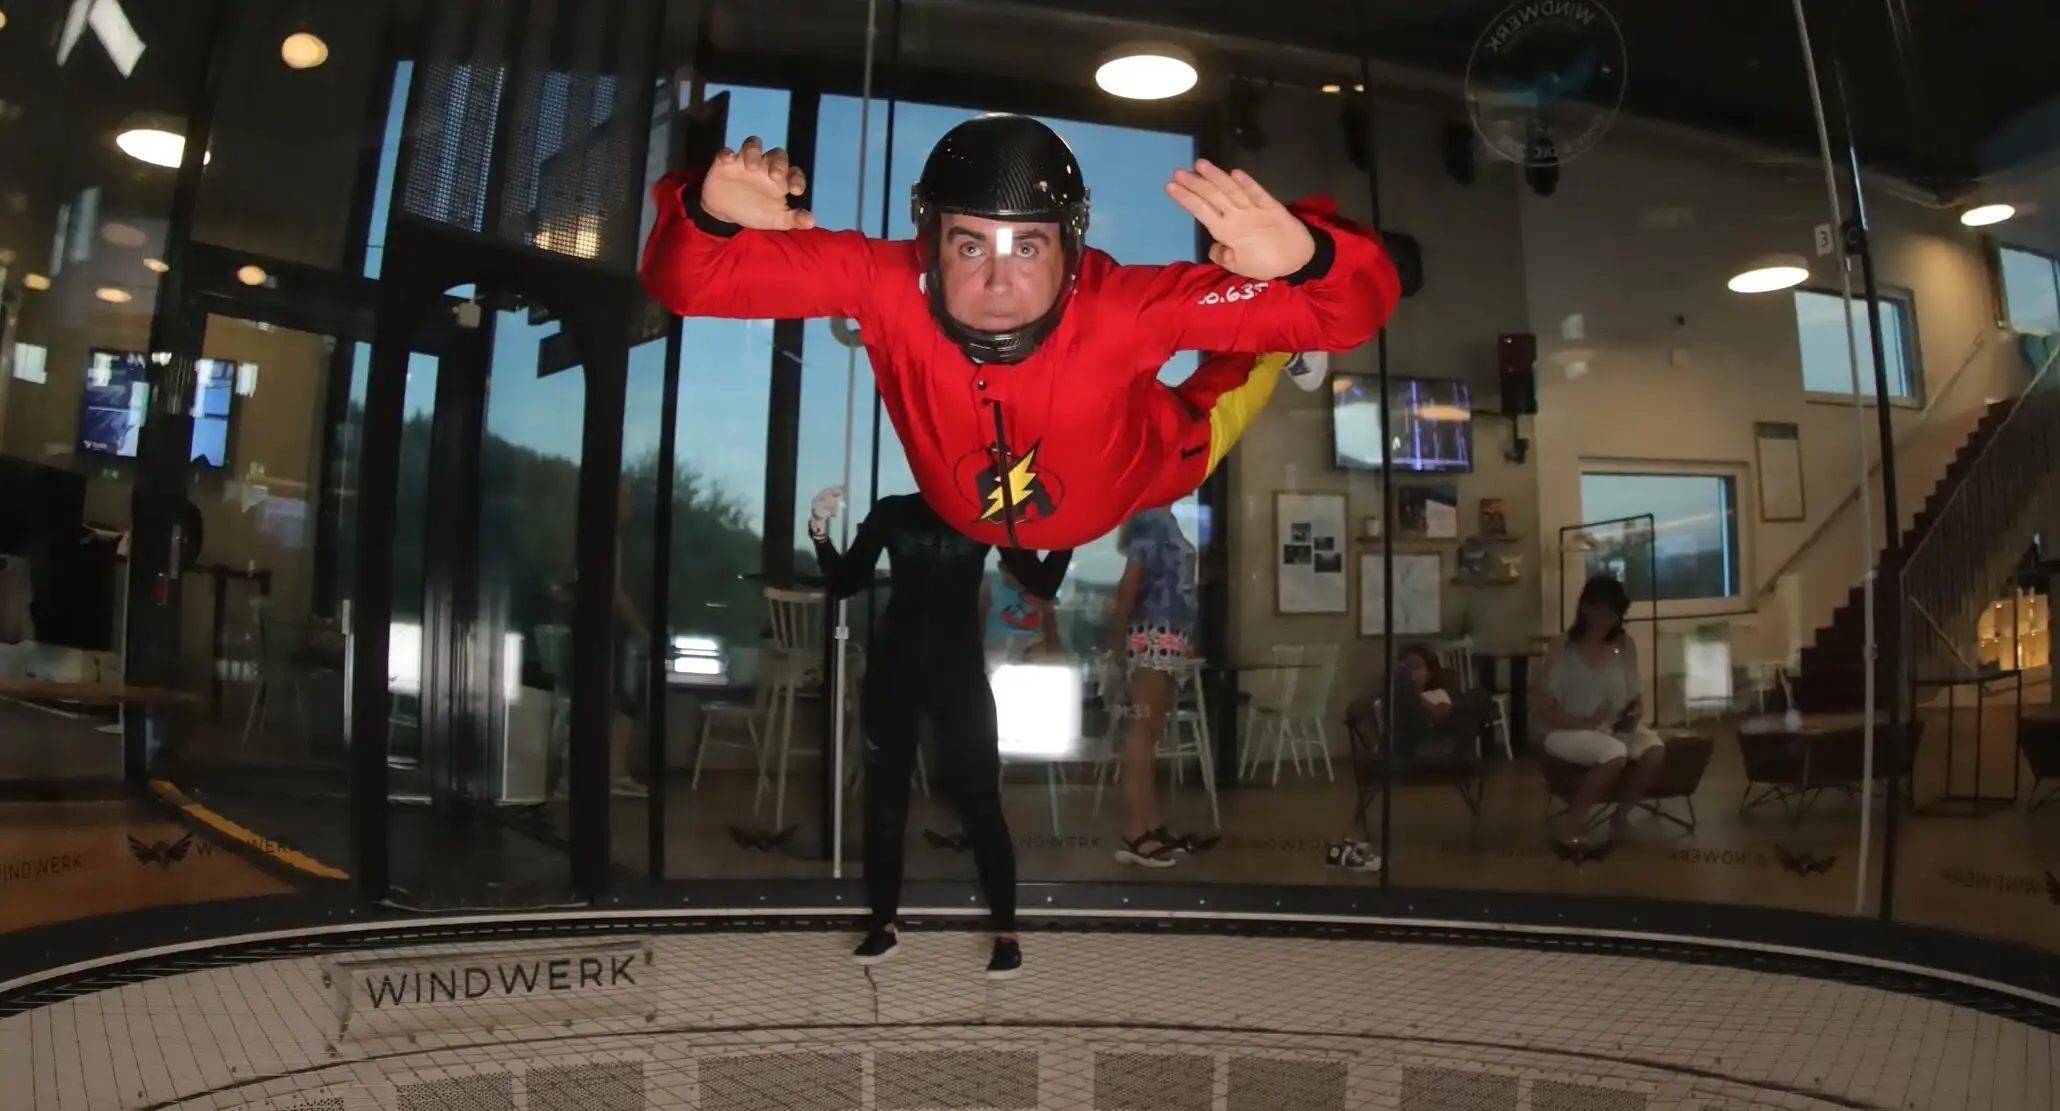 Indoor skydiving, also known as vertical wind tunnel skydiving or bodyflight